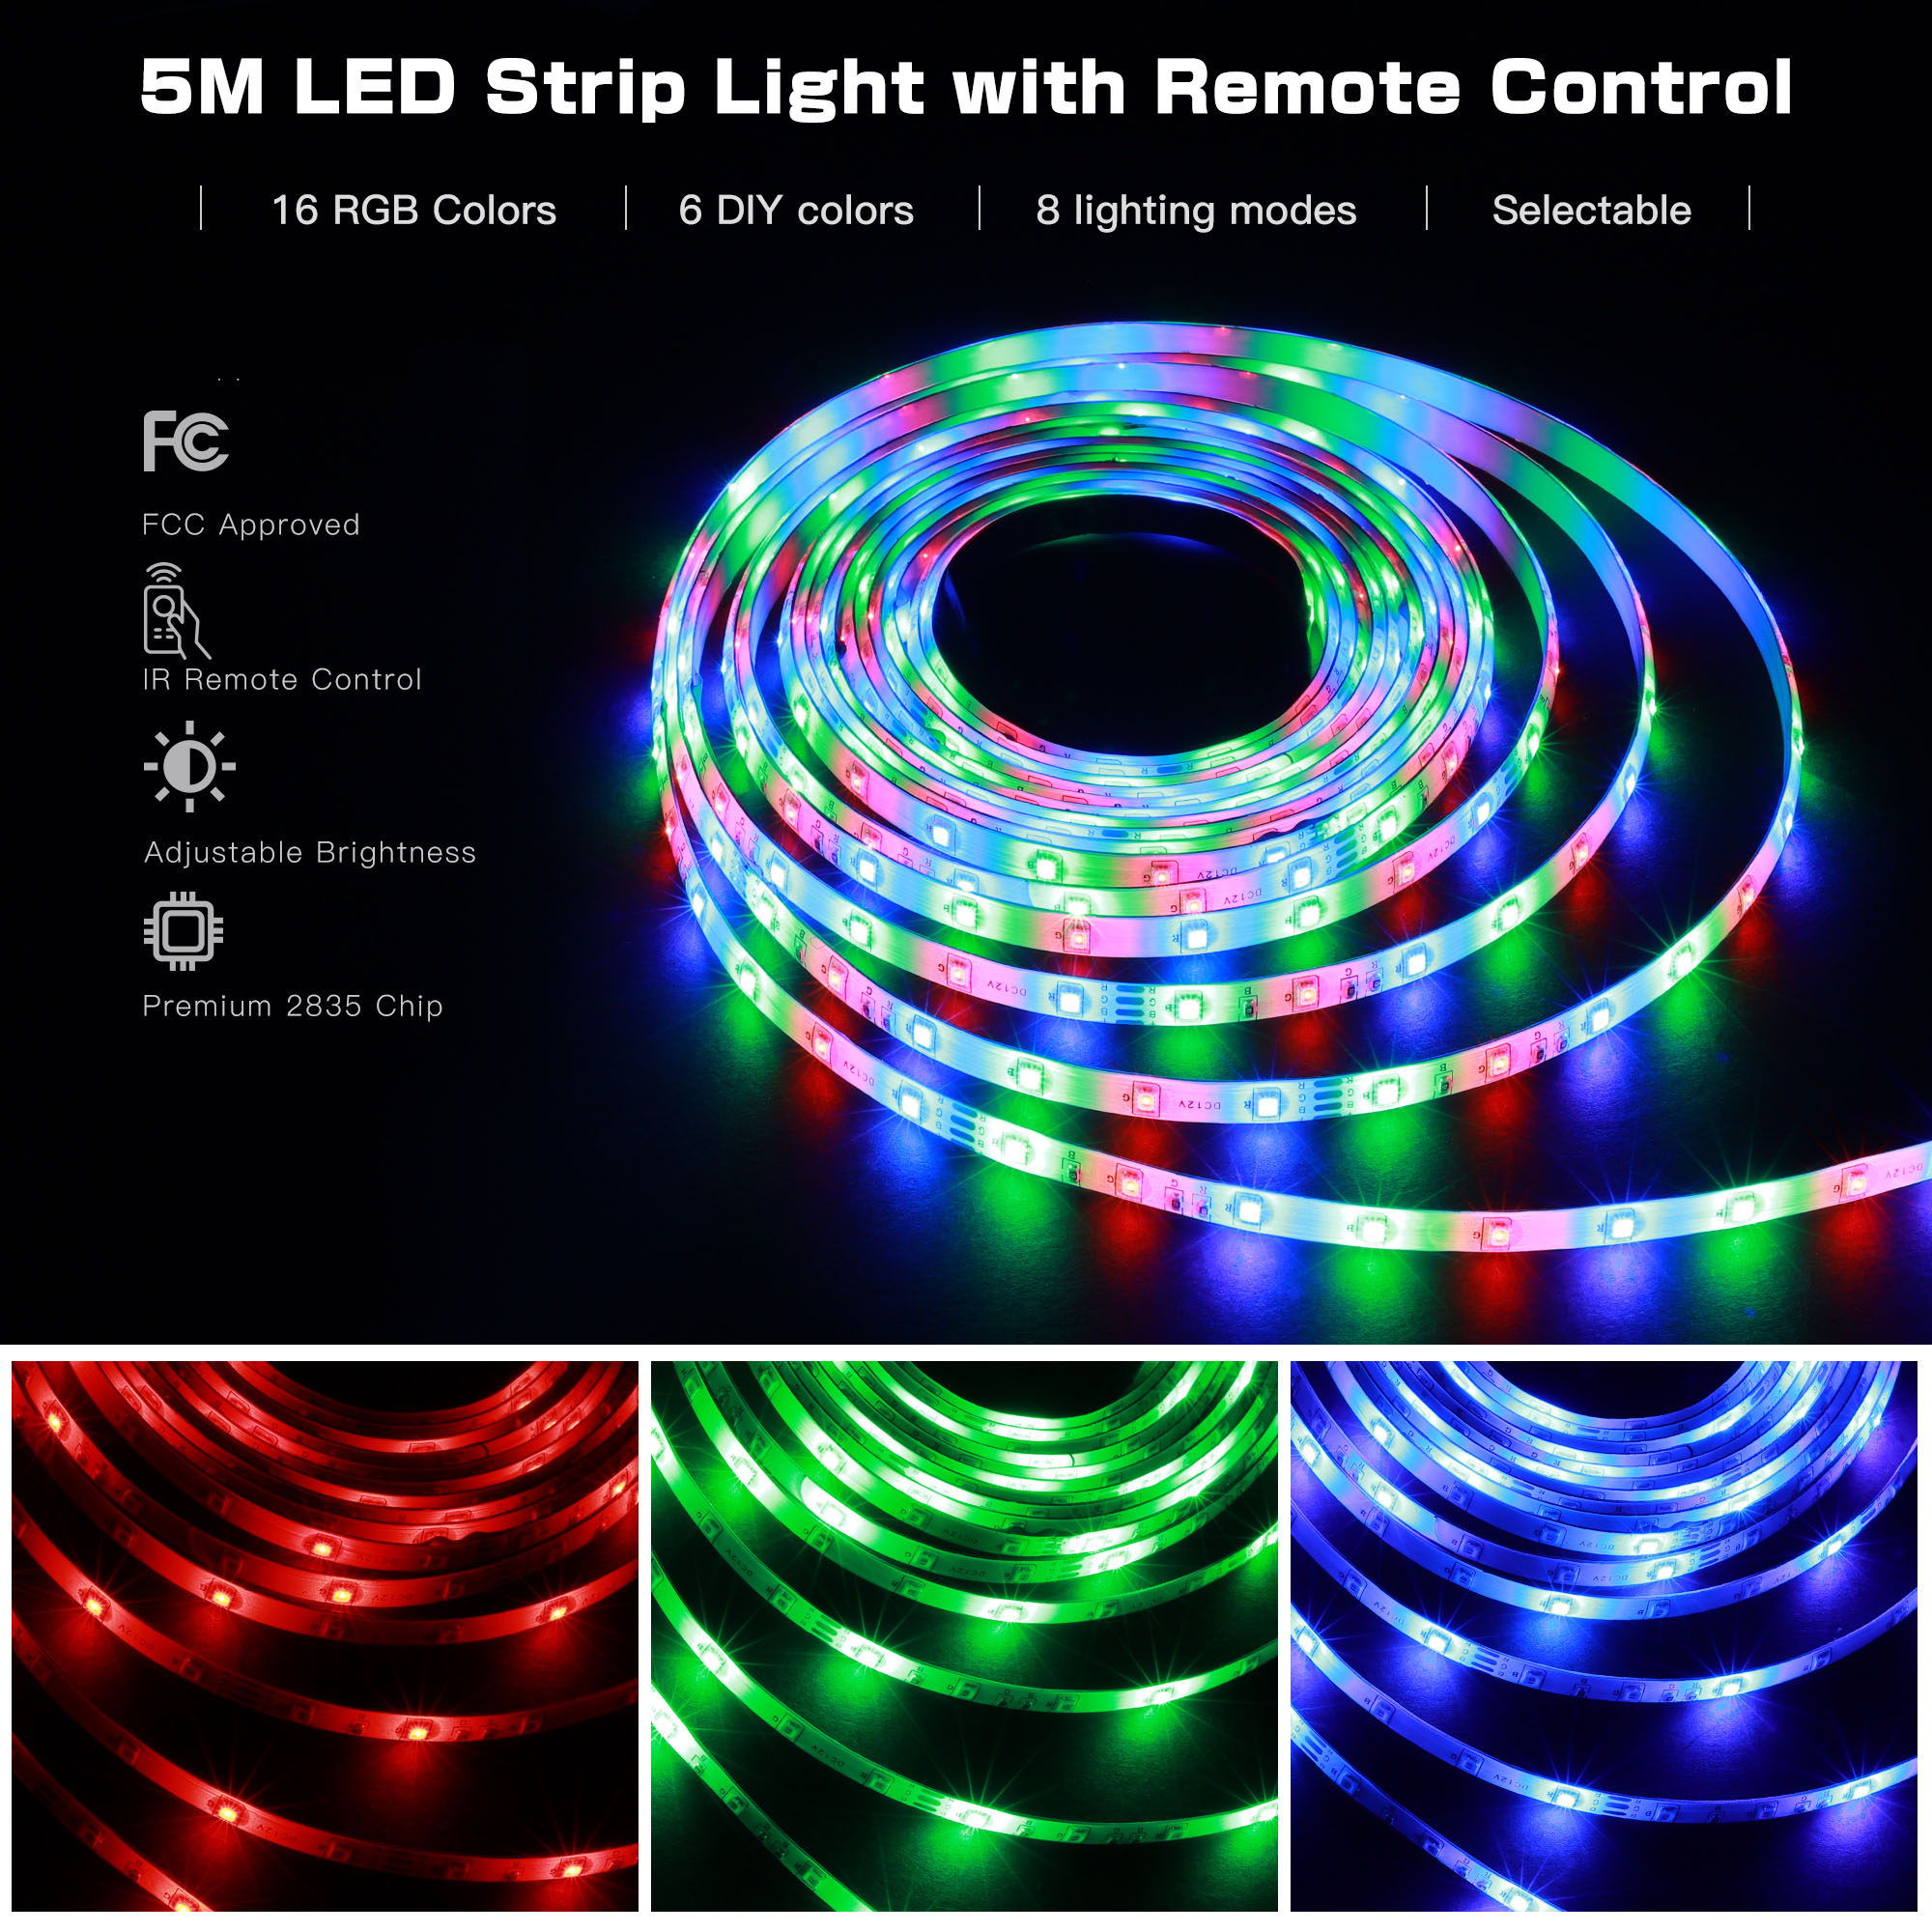 LED Lights Strip in Home,SOAIY Waterproof Adhesive Tape Lights,16.4ft RGB DIY Color Changing Rope Lights for TV Backlight Halloween Christmas lights w/IR Remote Control - image 3 of 16